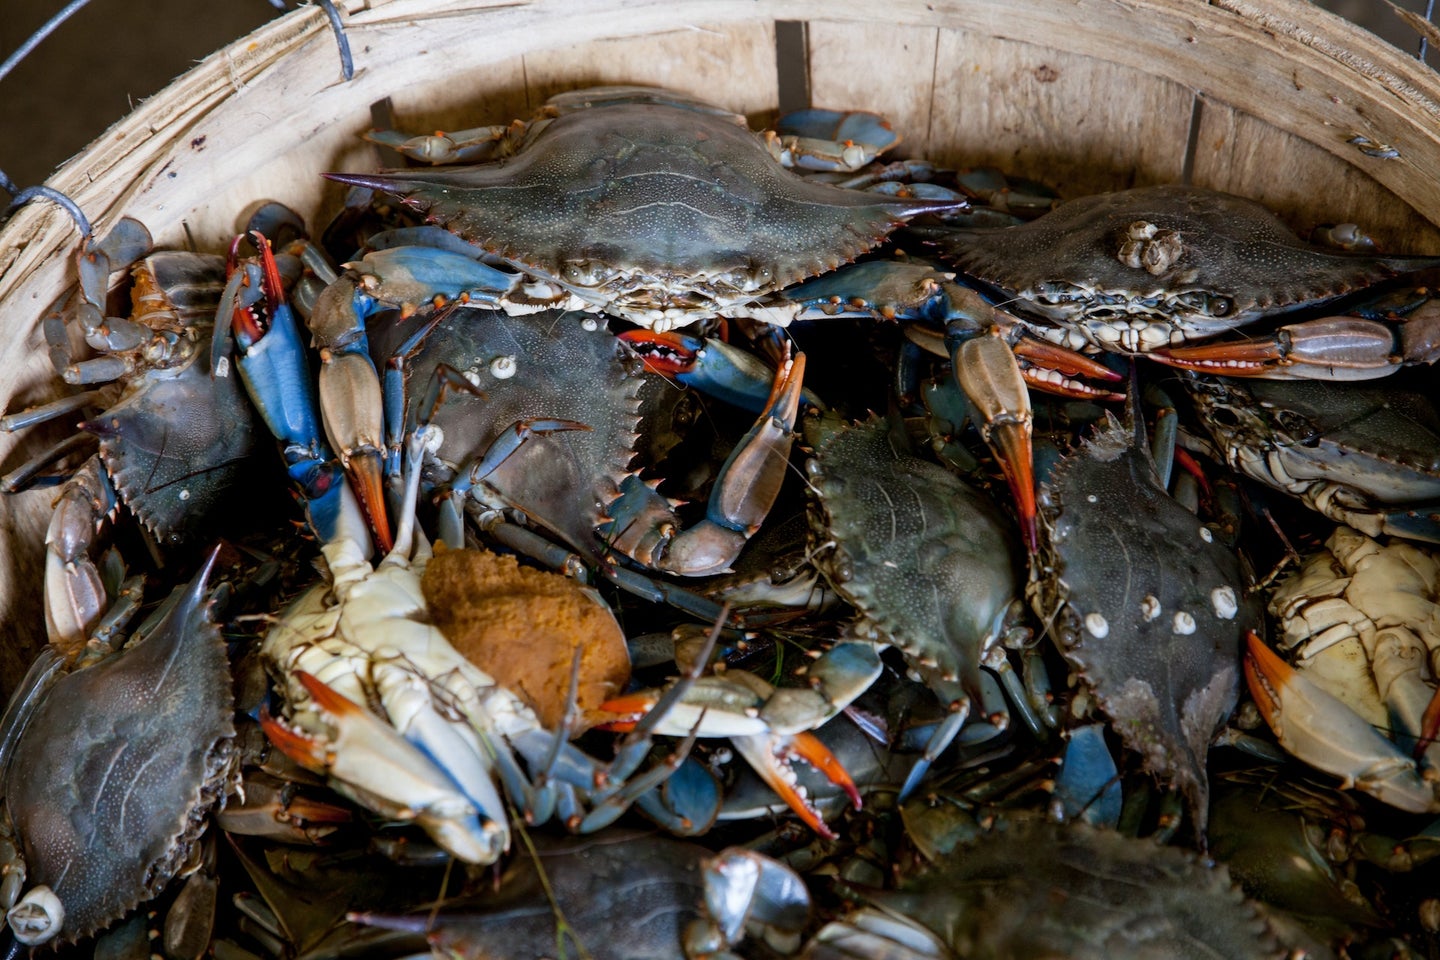 A bucket of crabs, who have a multi-purpose material called chitosan in their shells.